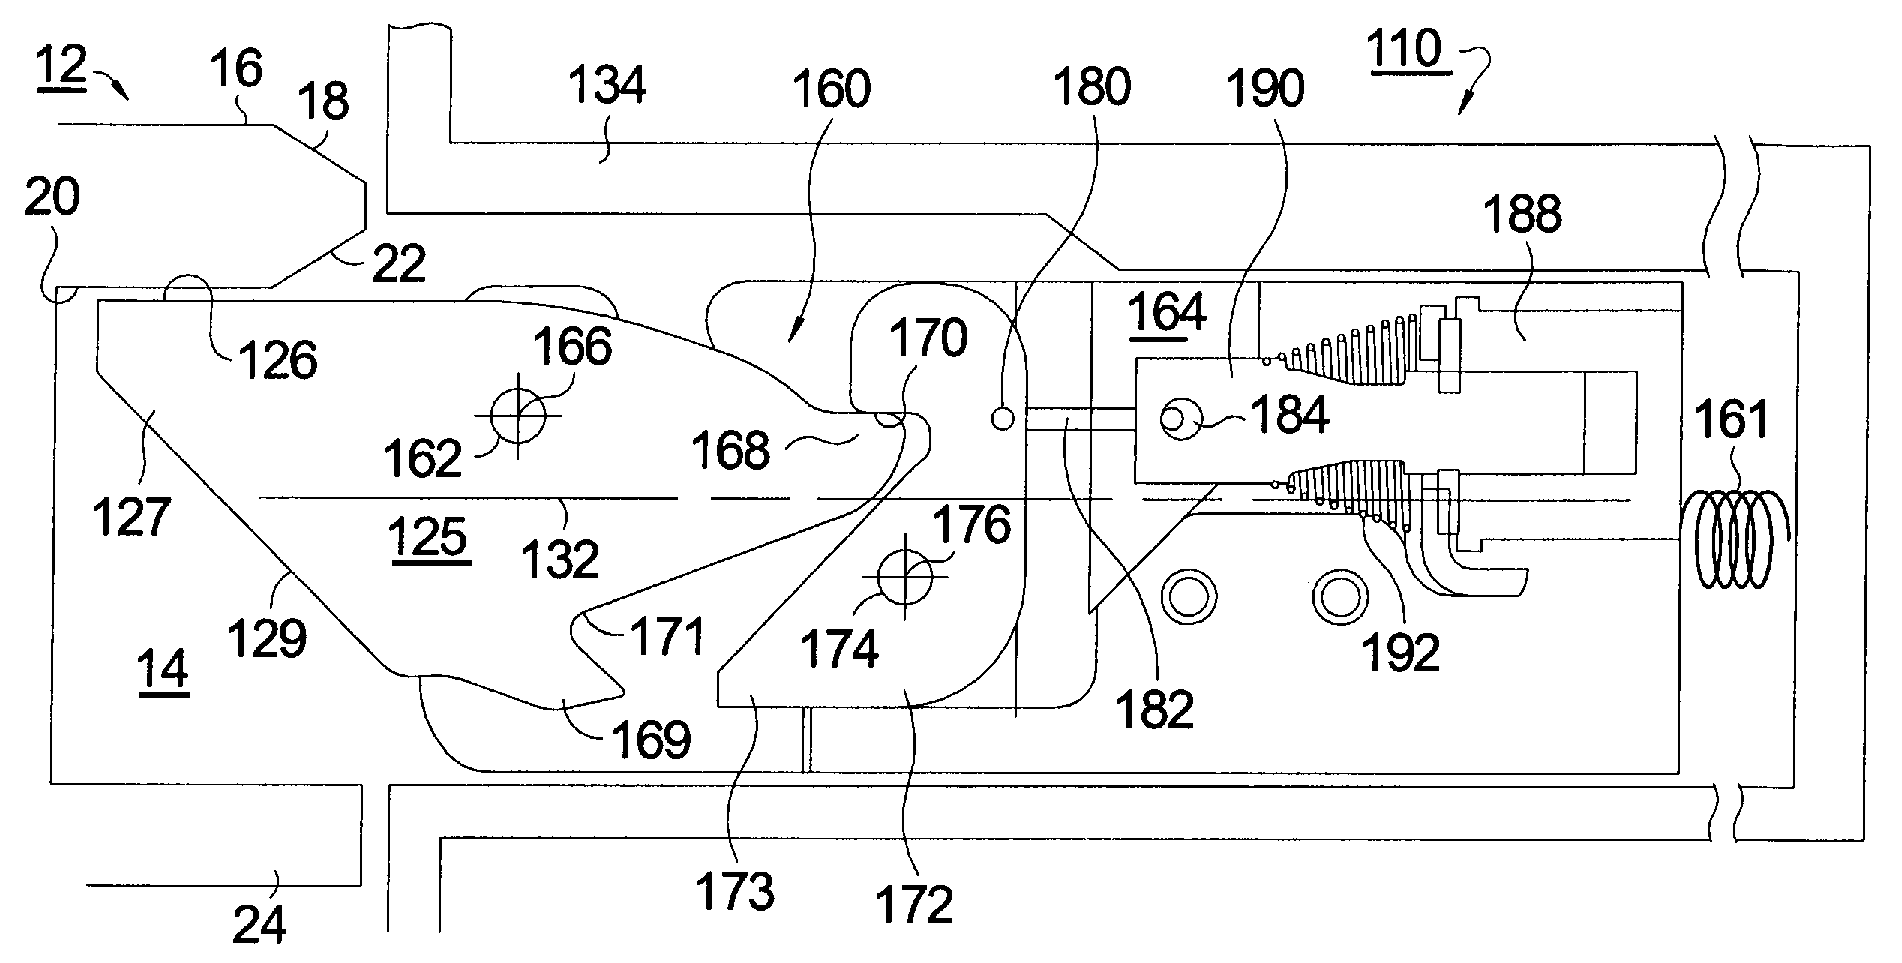 Rotating latch for latching and unlatching a door